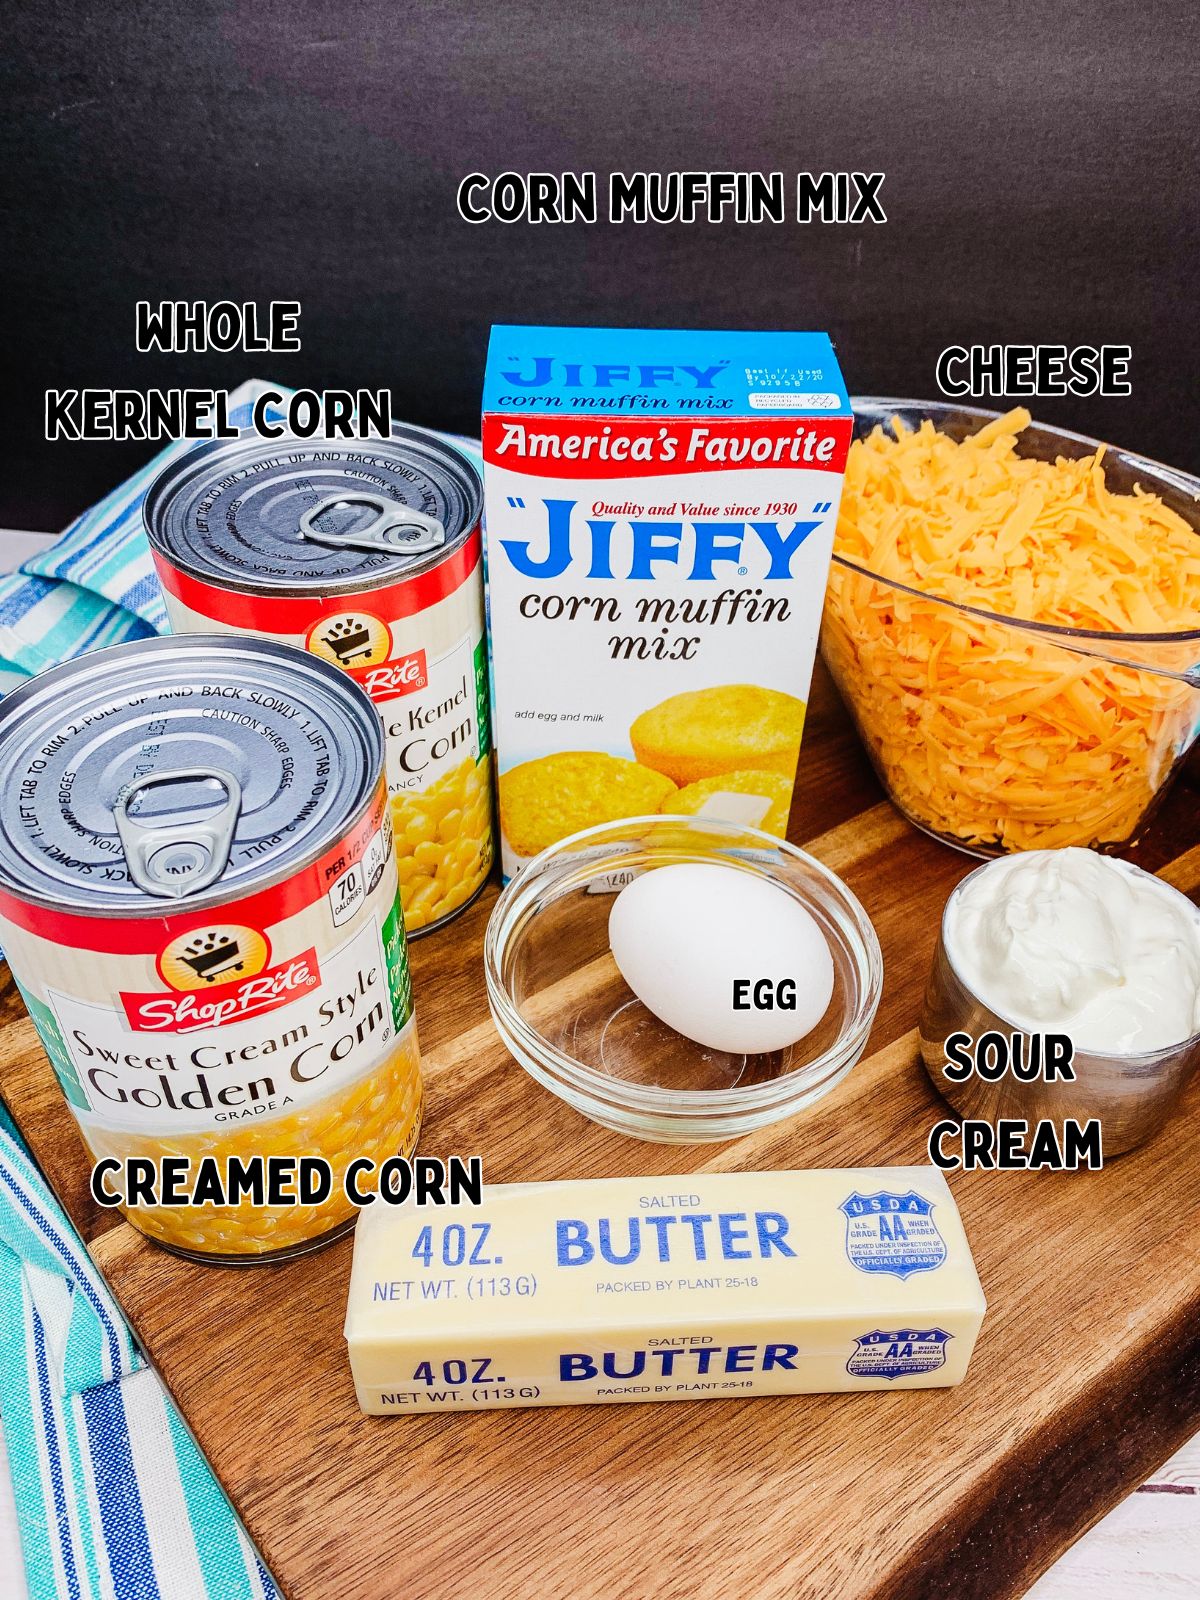 Ingredients for Corn Pudding Casserole.